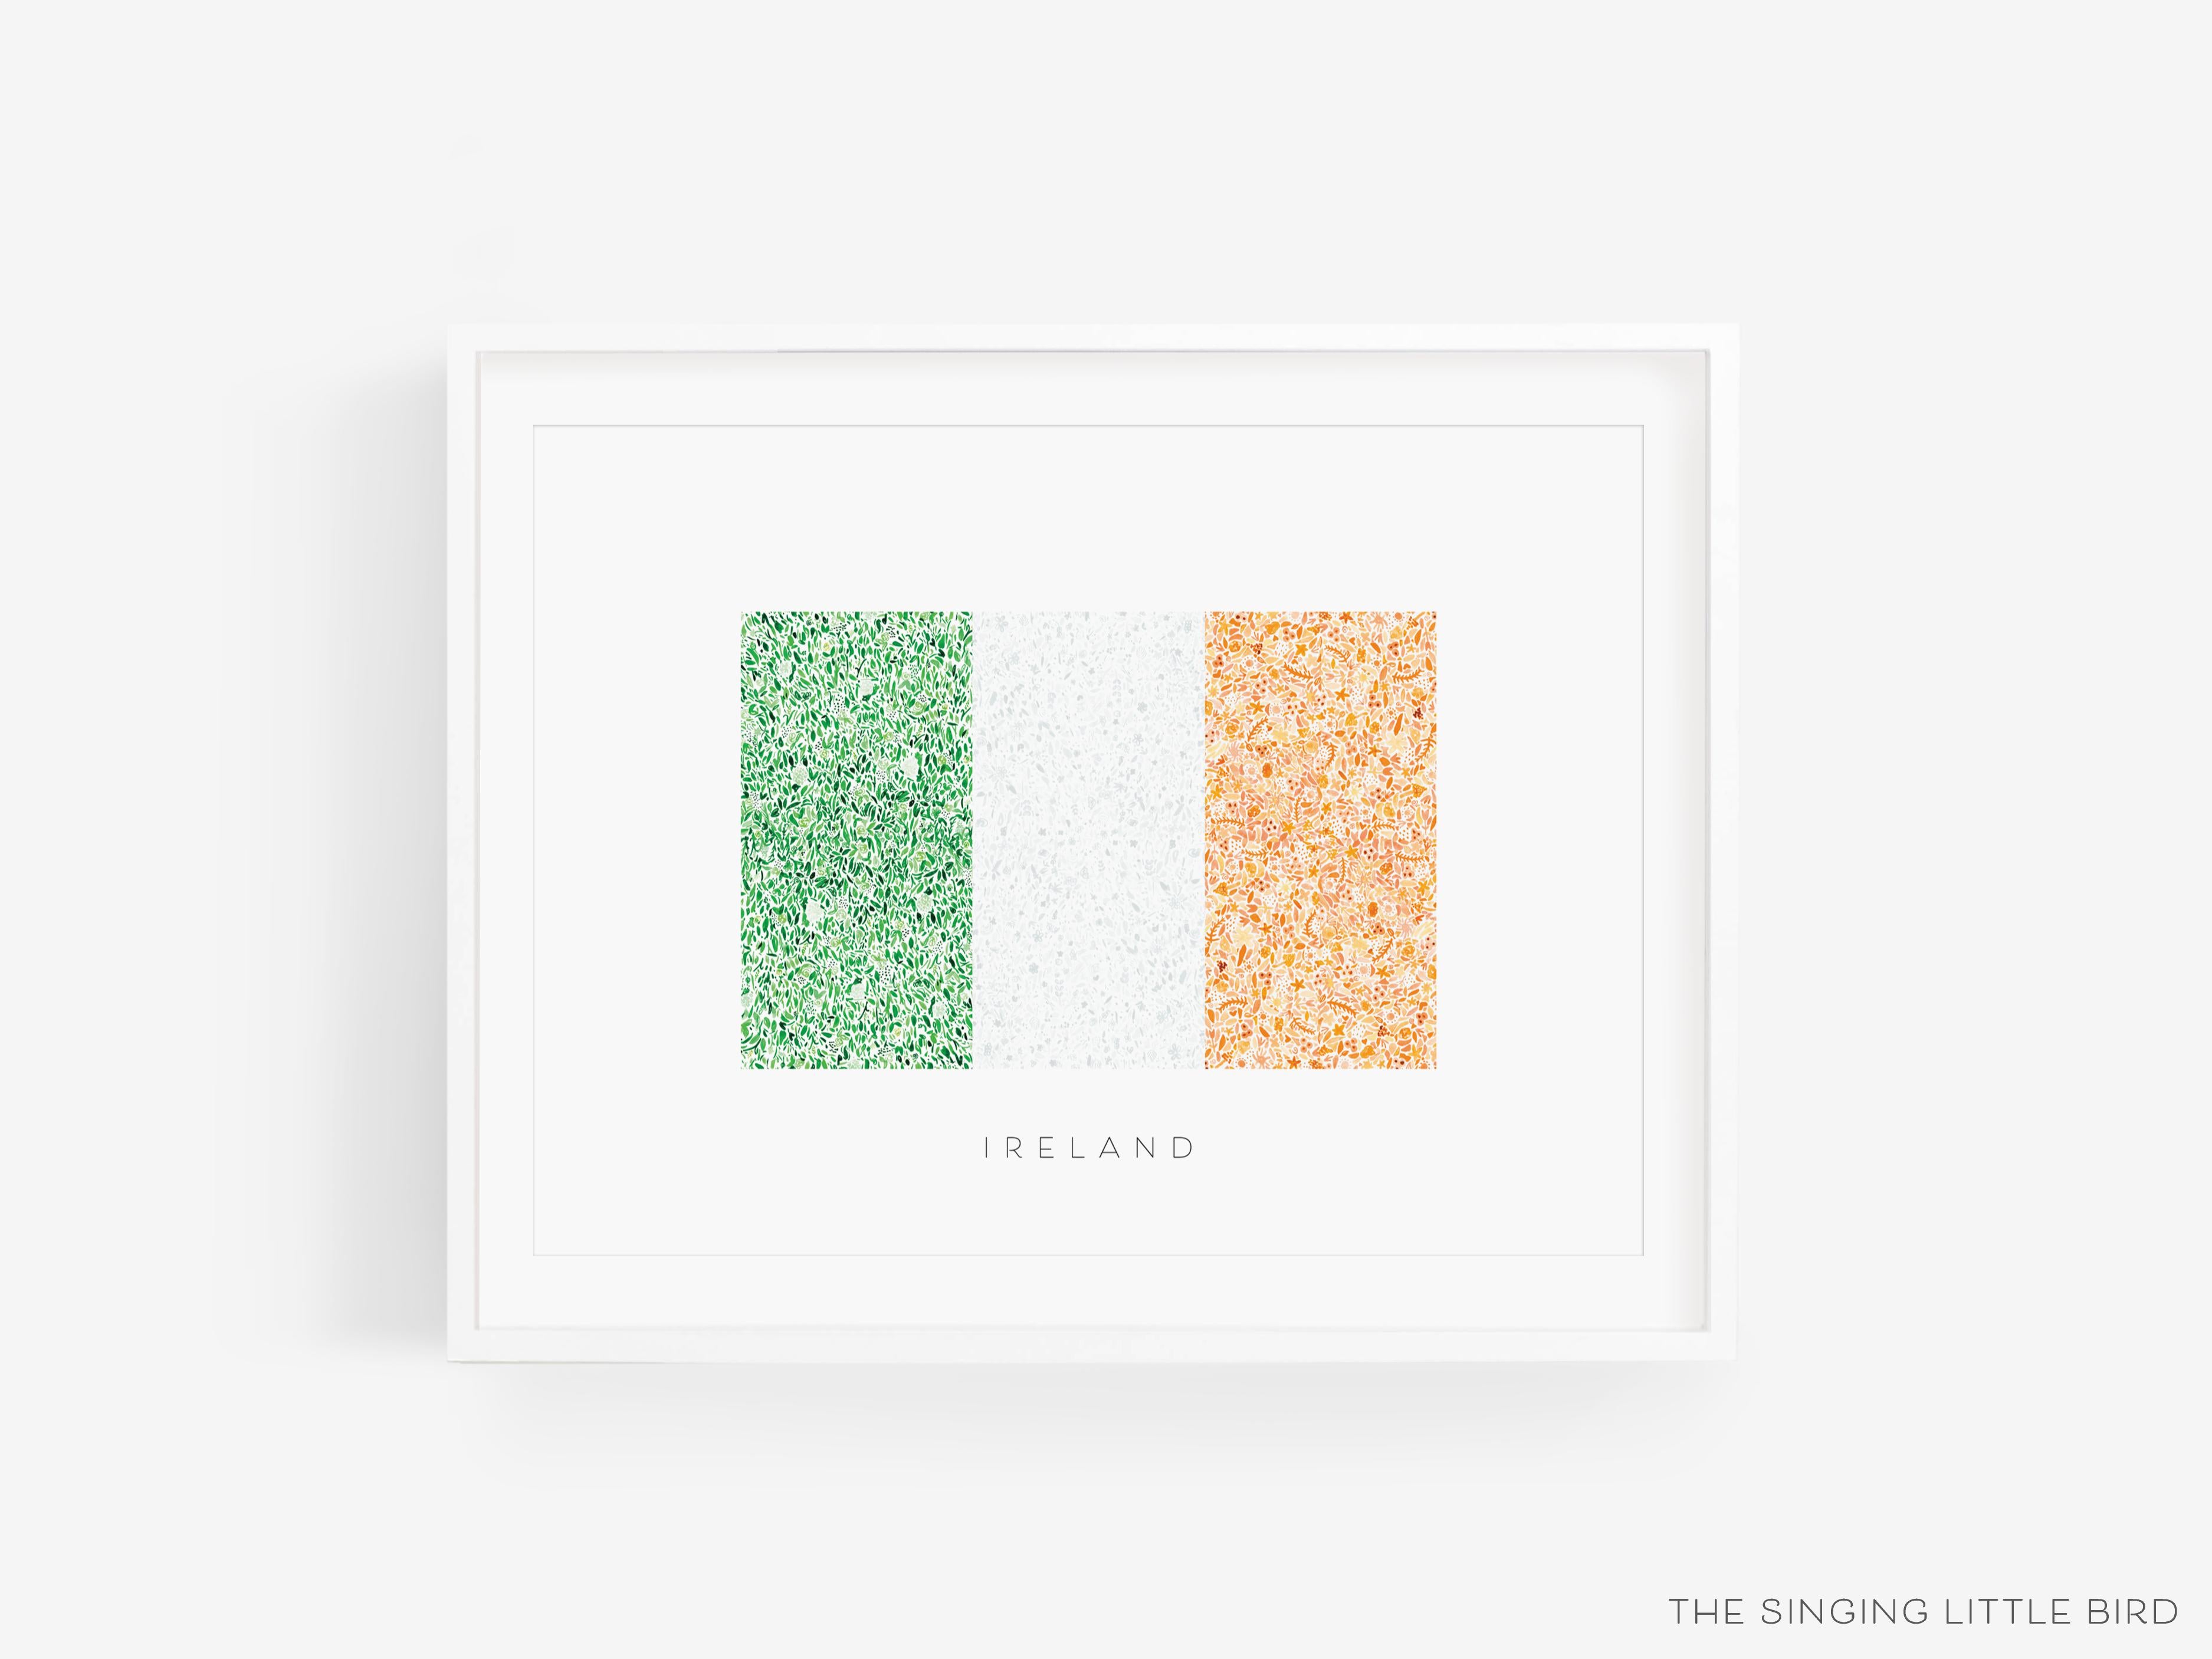 Irish Flag Ireland Art Print-This watercolor art print features our hand-painted Irish Flag, printed in the USA on 120lb high quality art paper. This makes a great gift or wall decor for the Irish lover in your life.-The Singing Little Bird